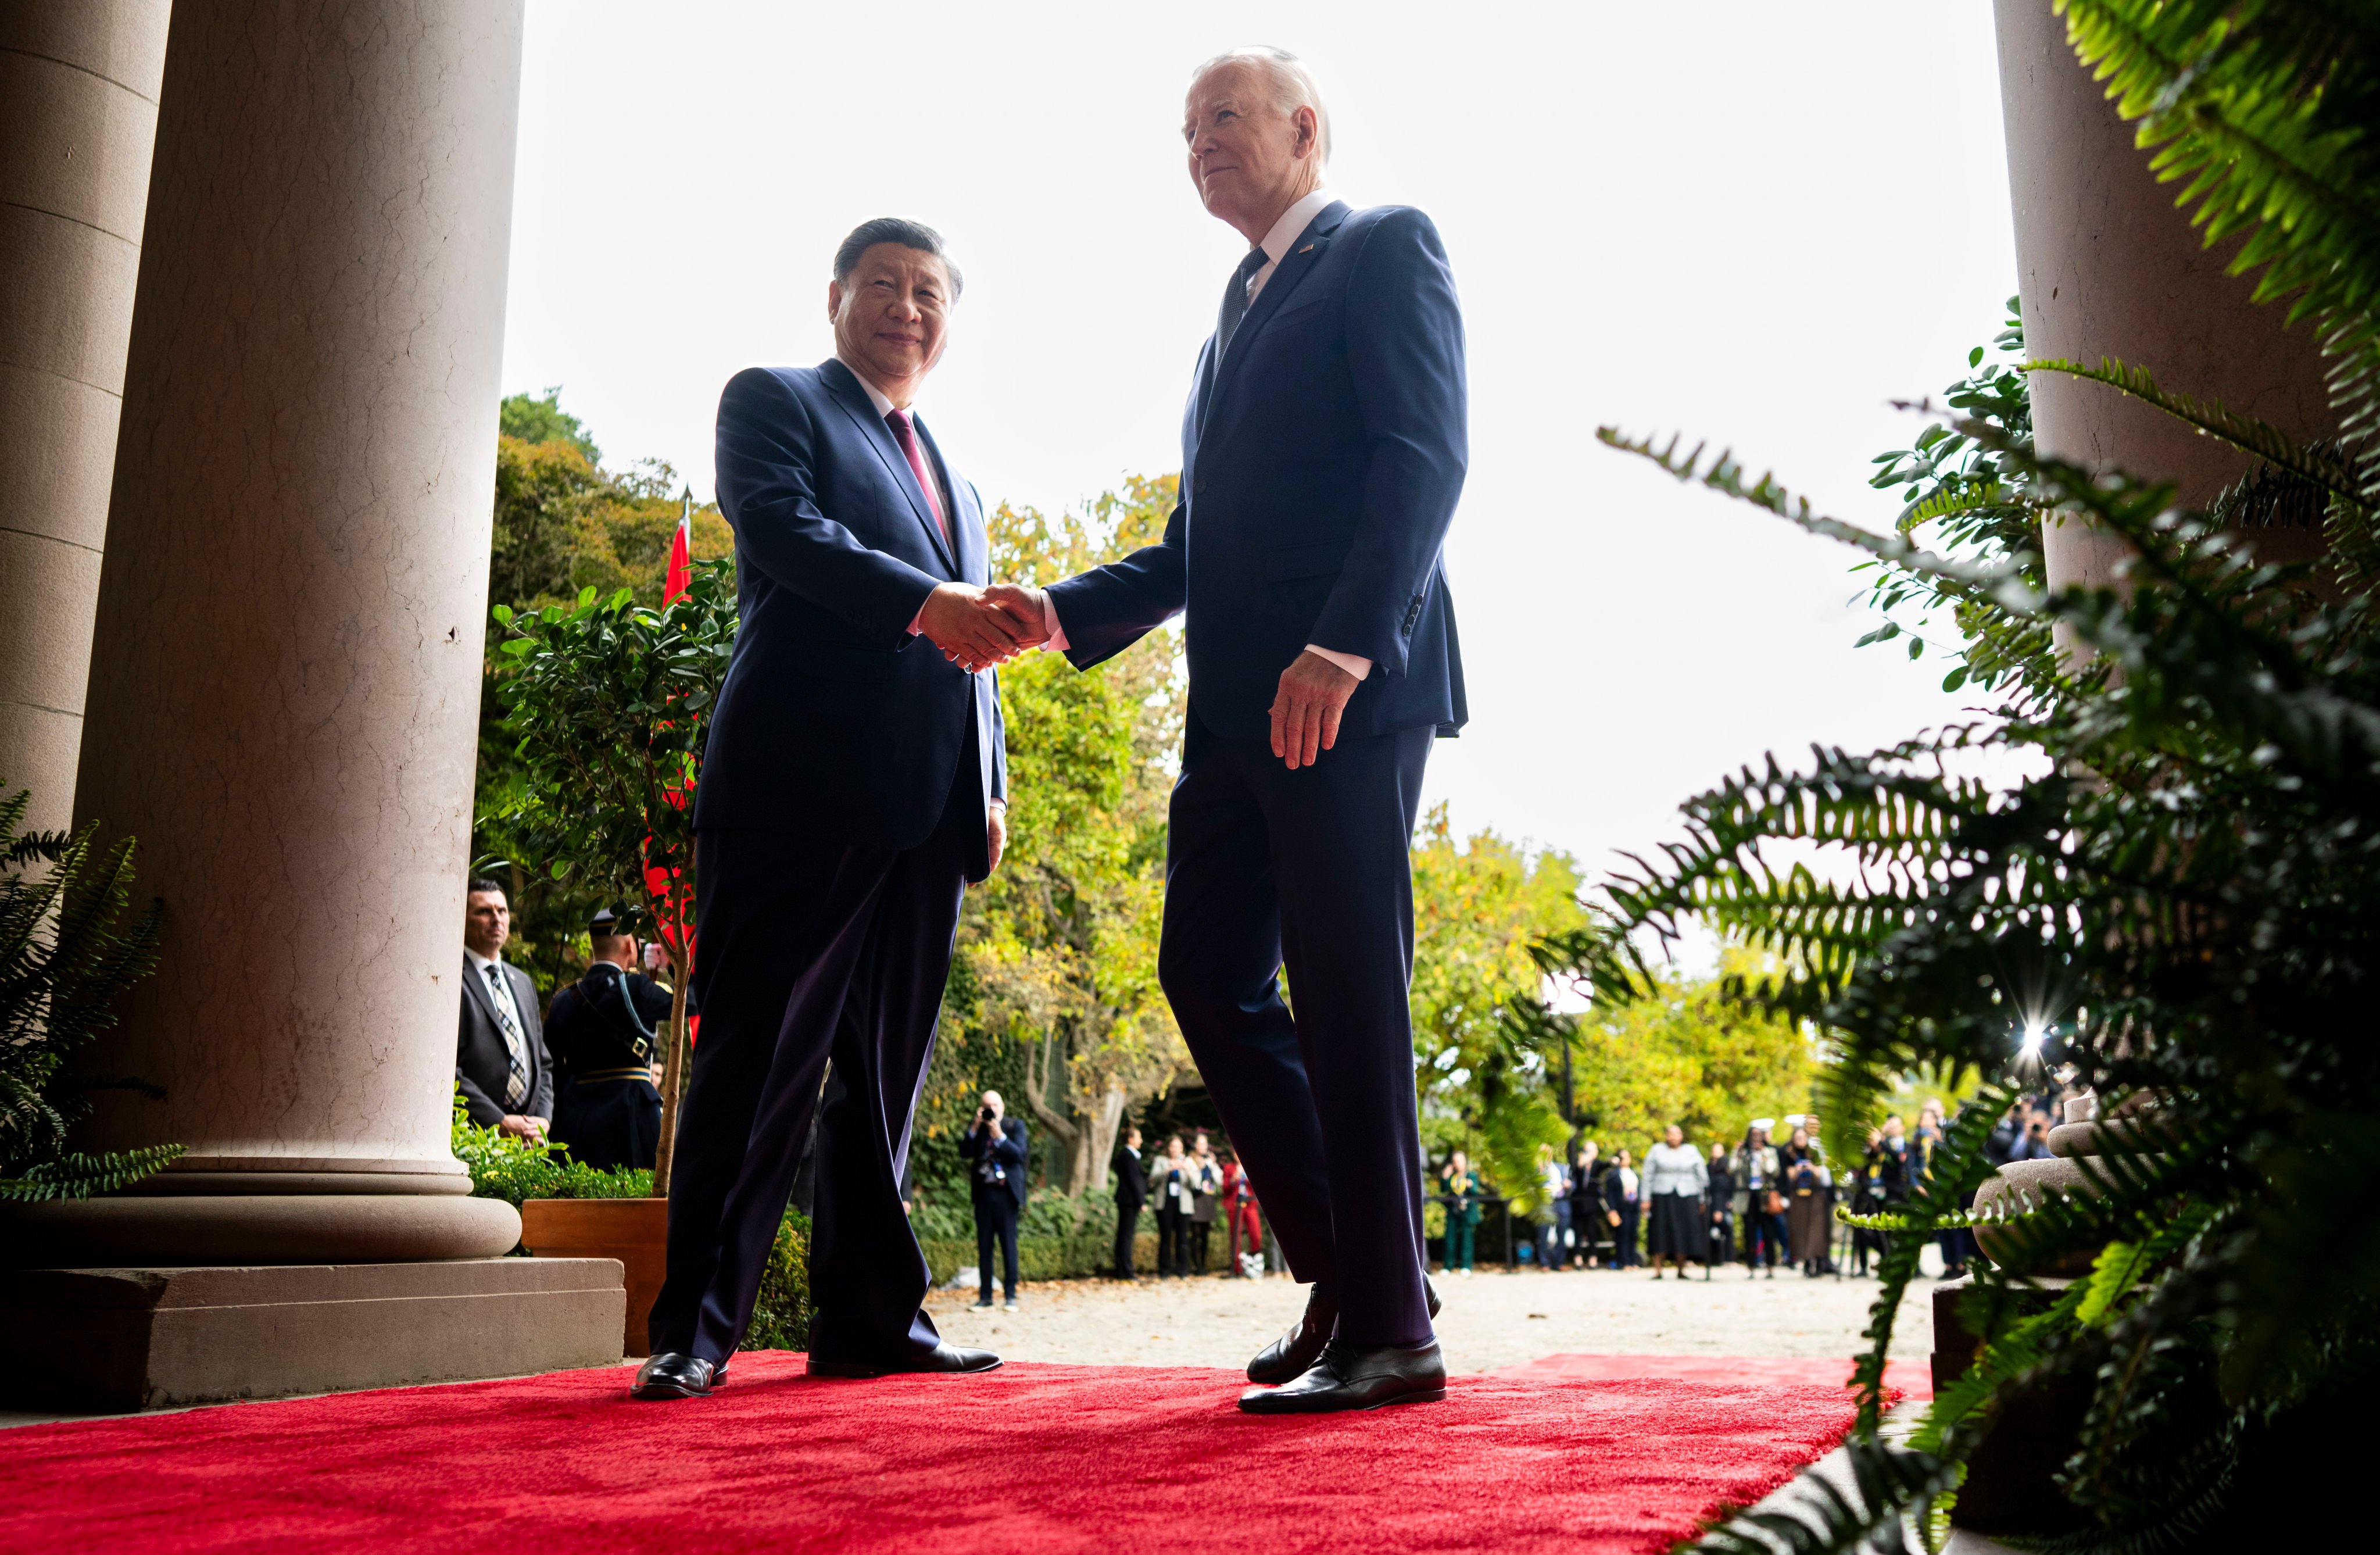 Presidents Joe Biden and Xi Jinping greet each other at a summit in November. Photo: AP